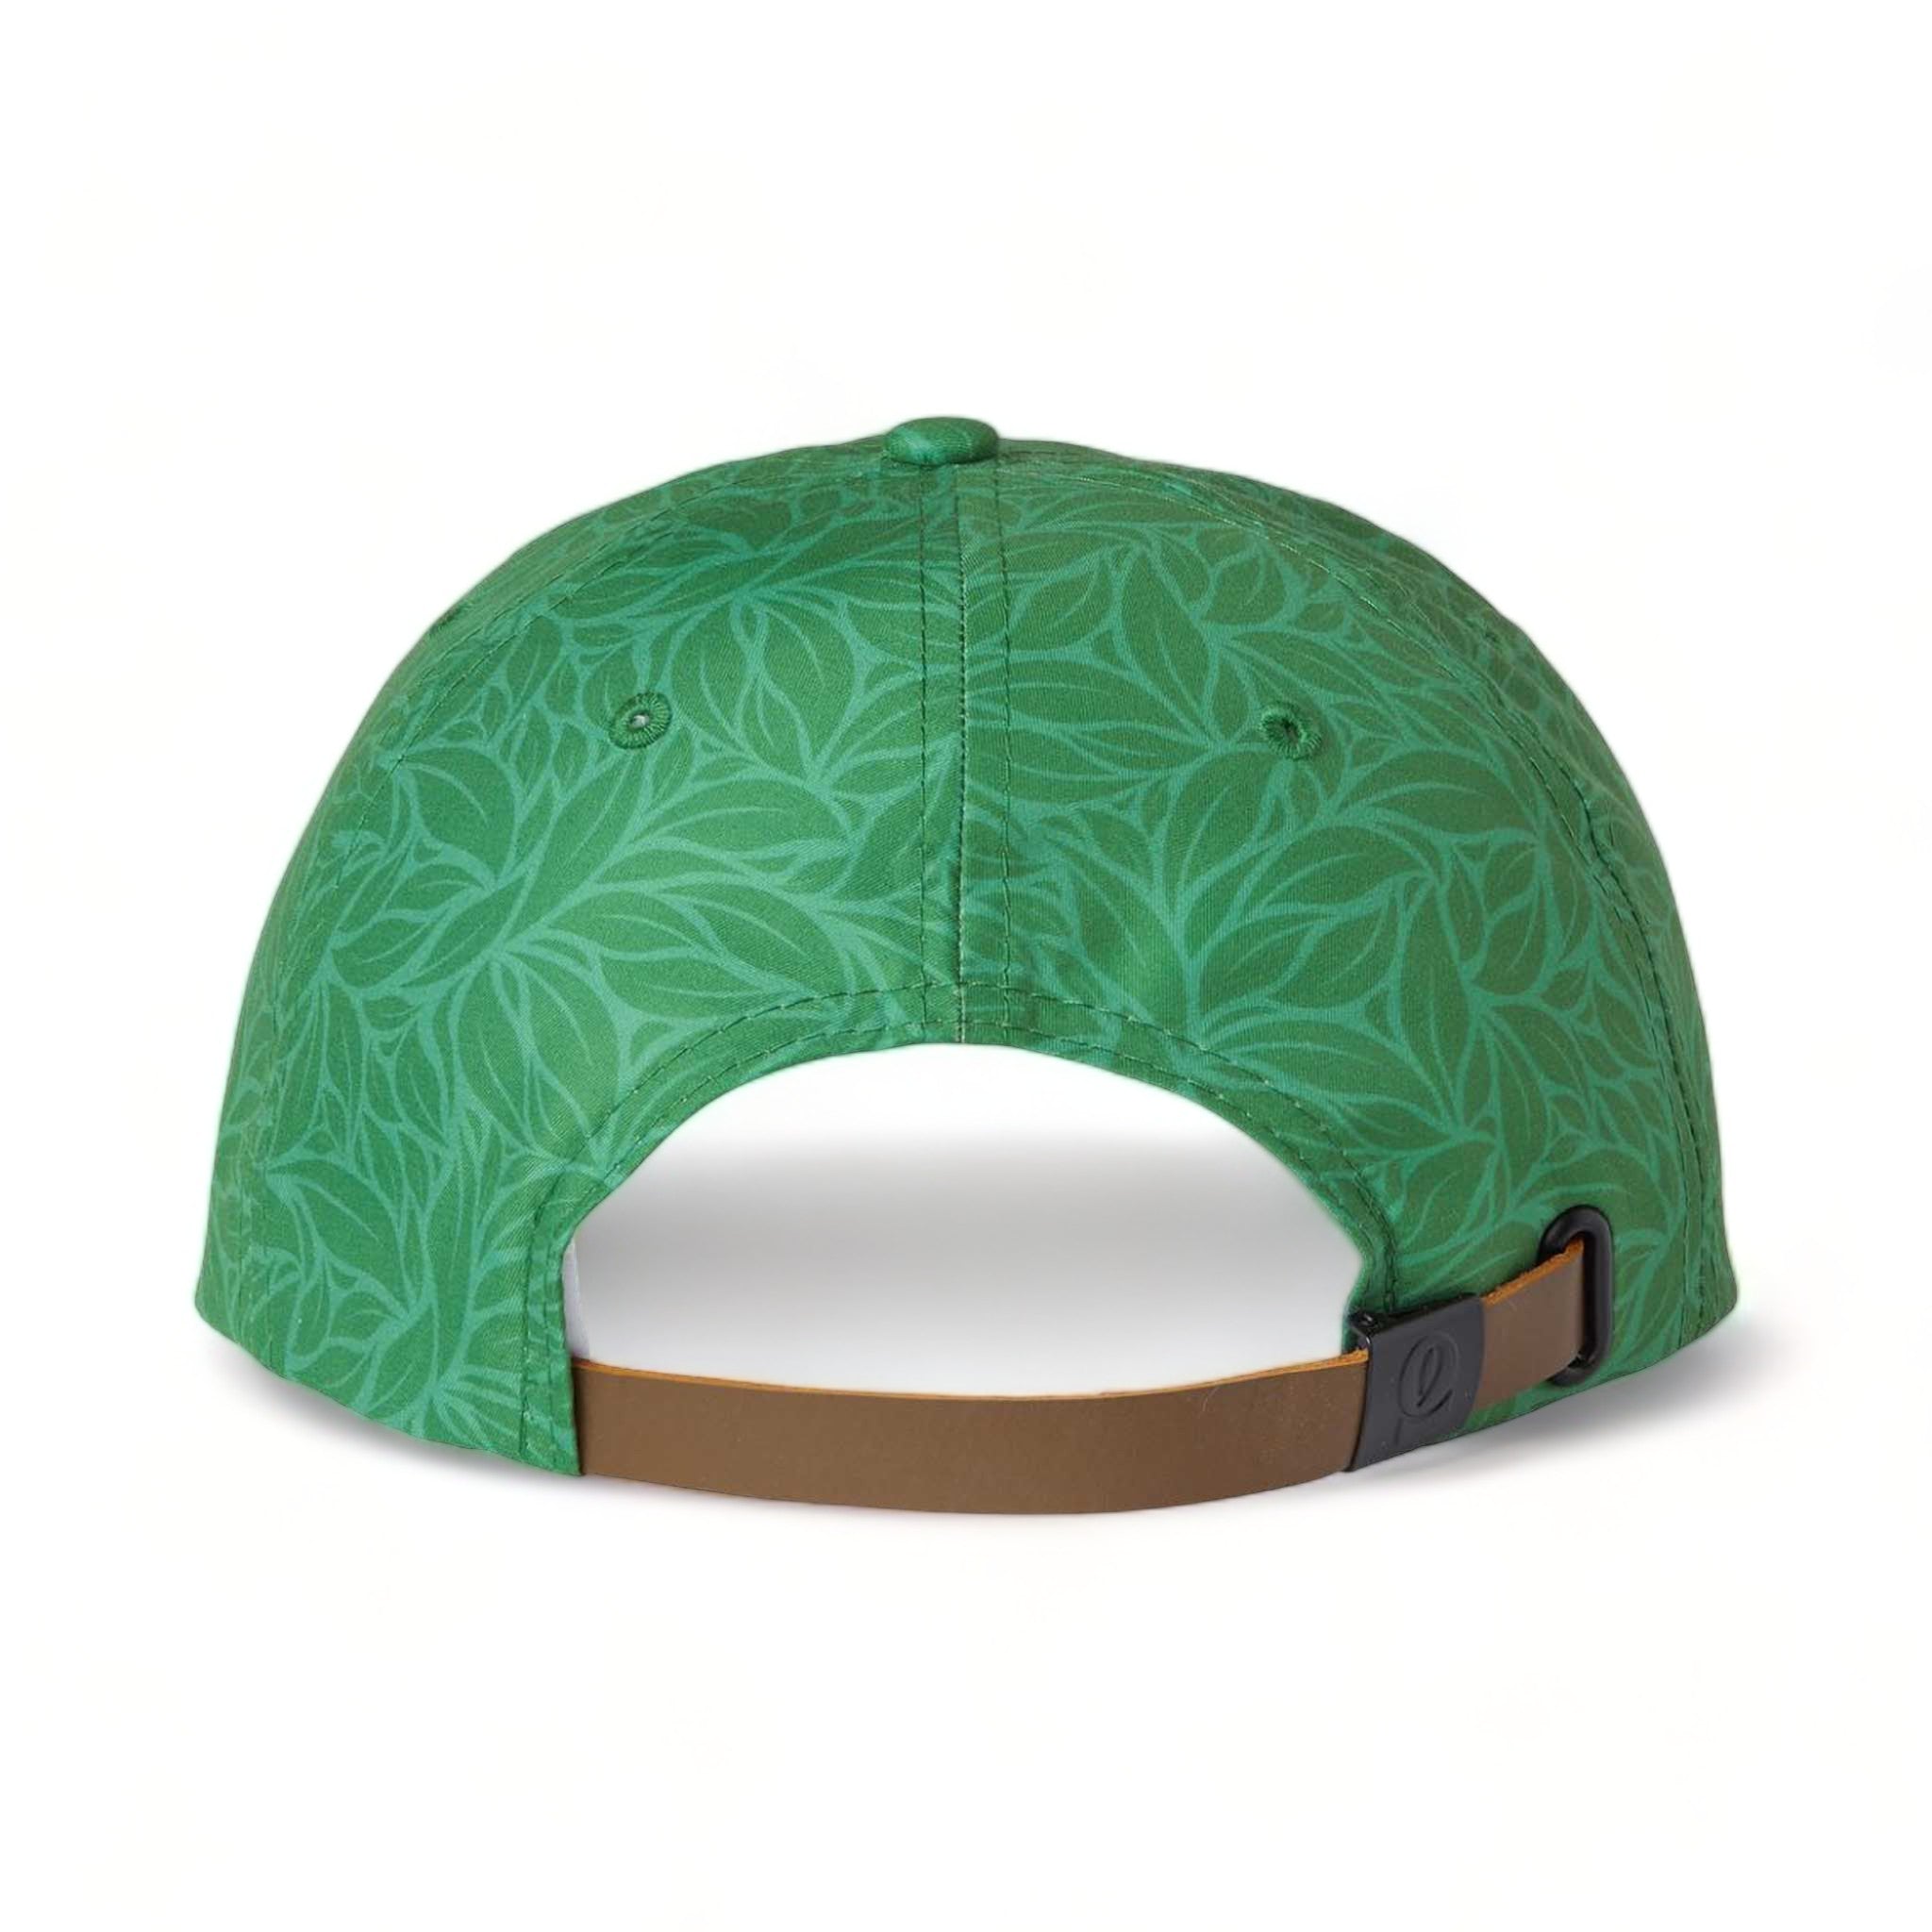 Back view of Imperial DNA010 custom hat in green floral